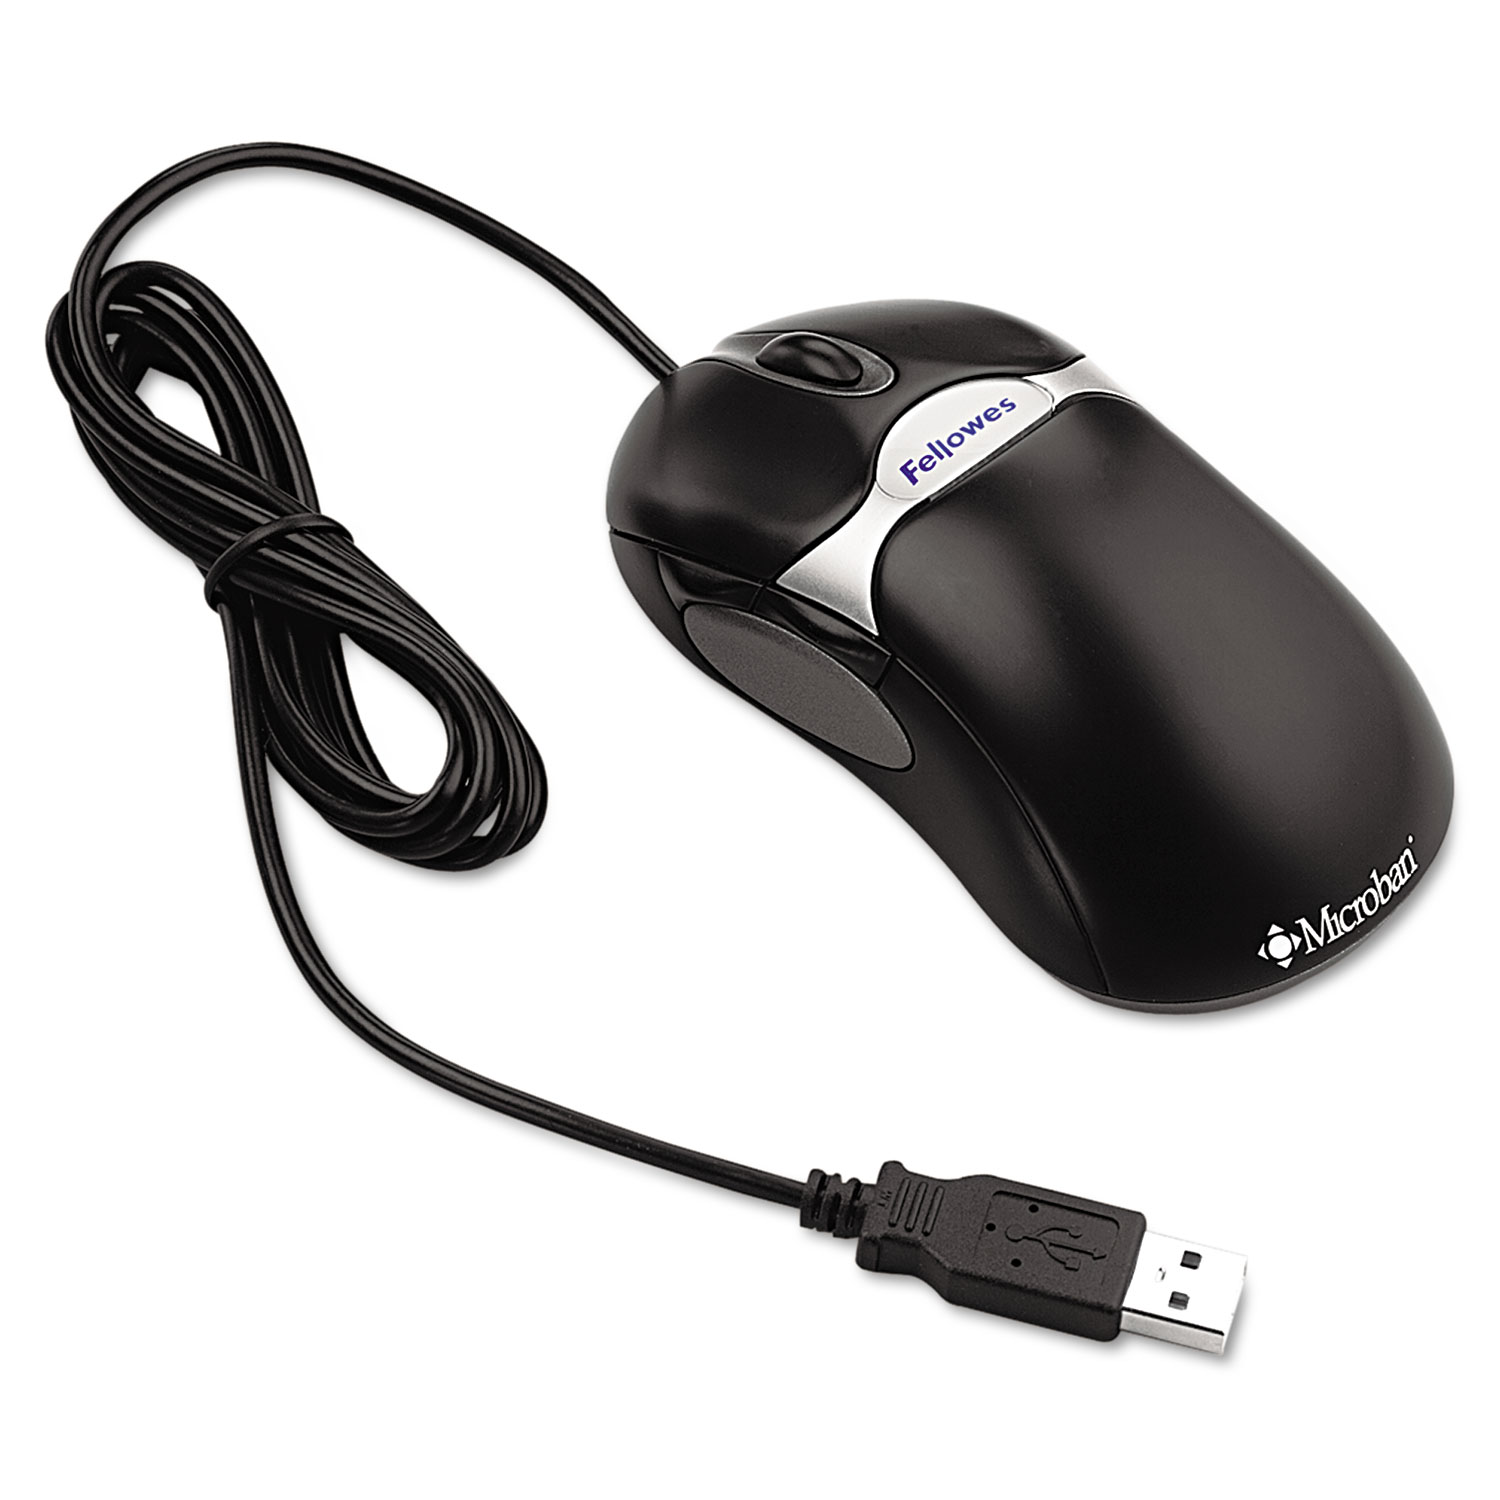  Fellowes 98913 Microban Five-Button Optical Mouse, USB 2.0, Left/Right Hand Use, Black/Silver (FEL98913) 